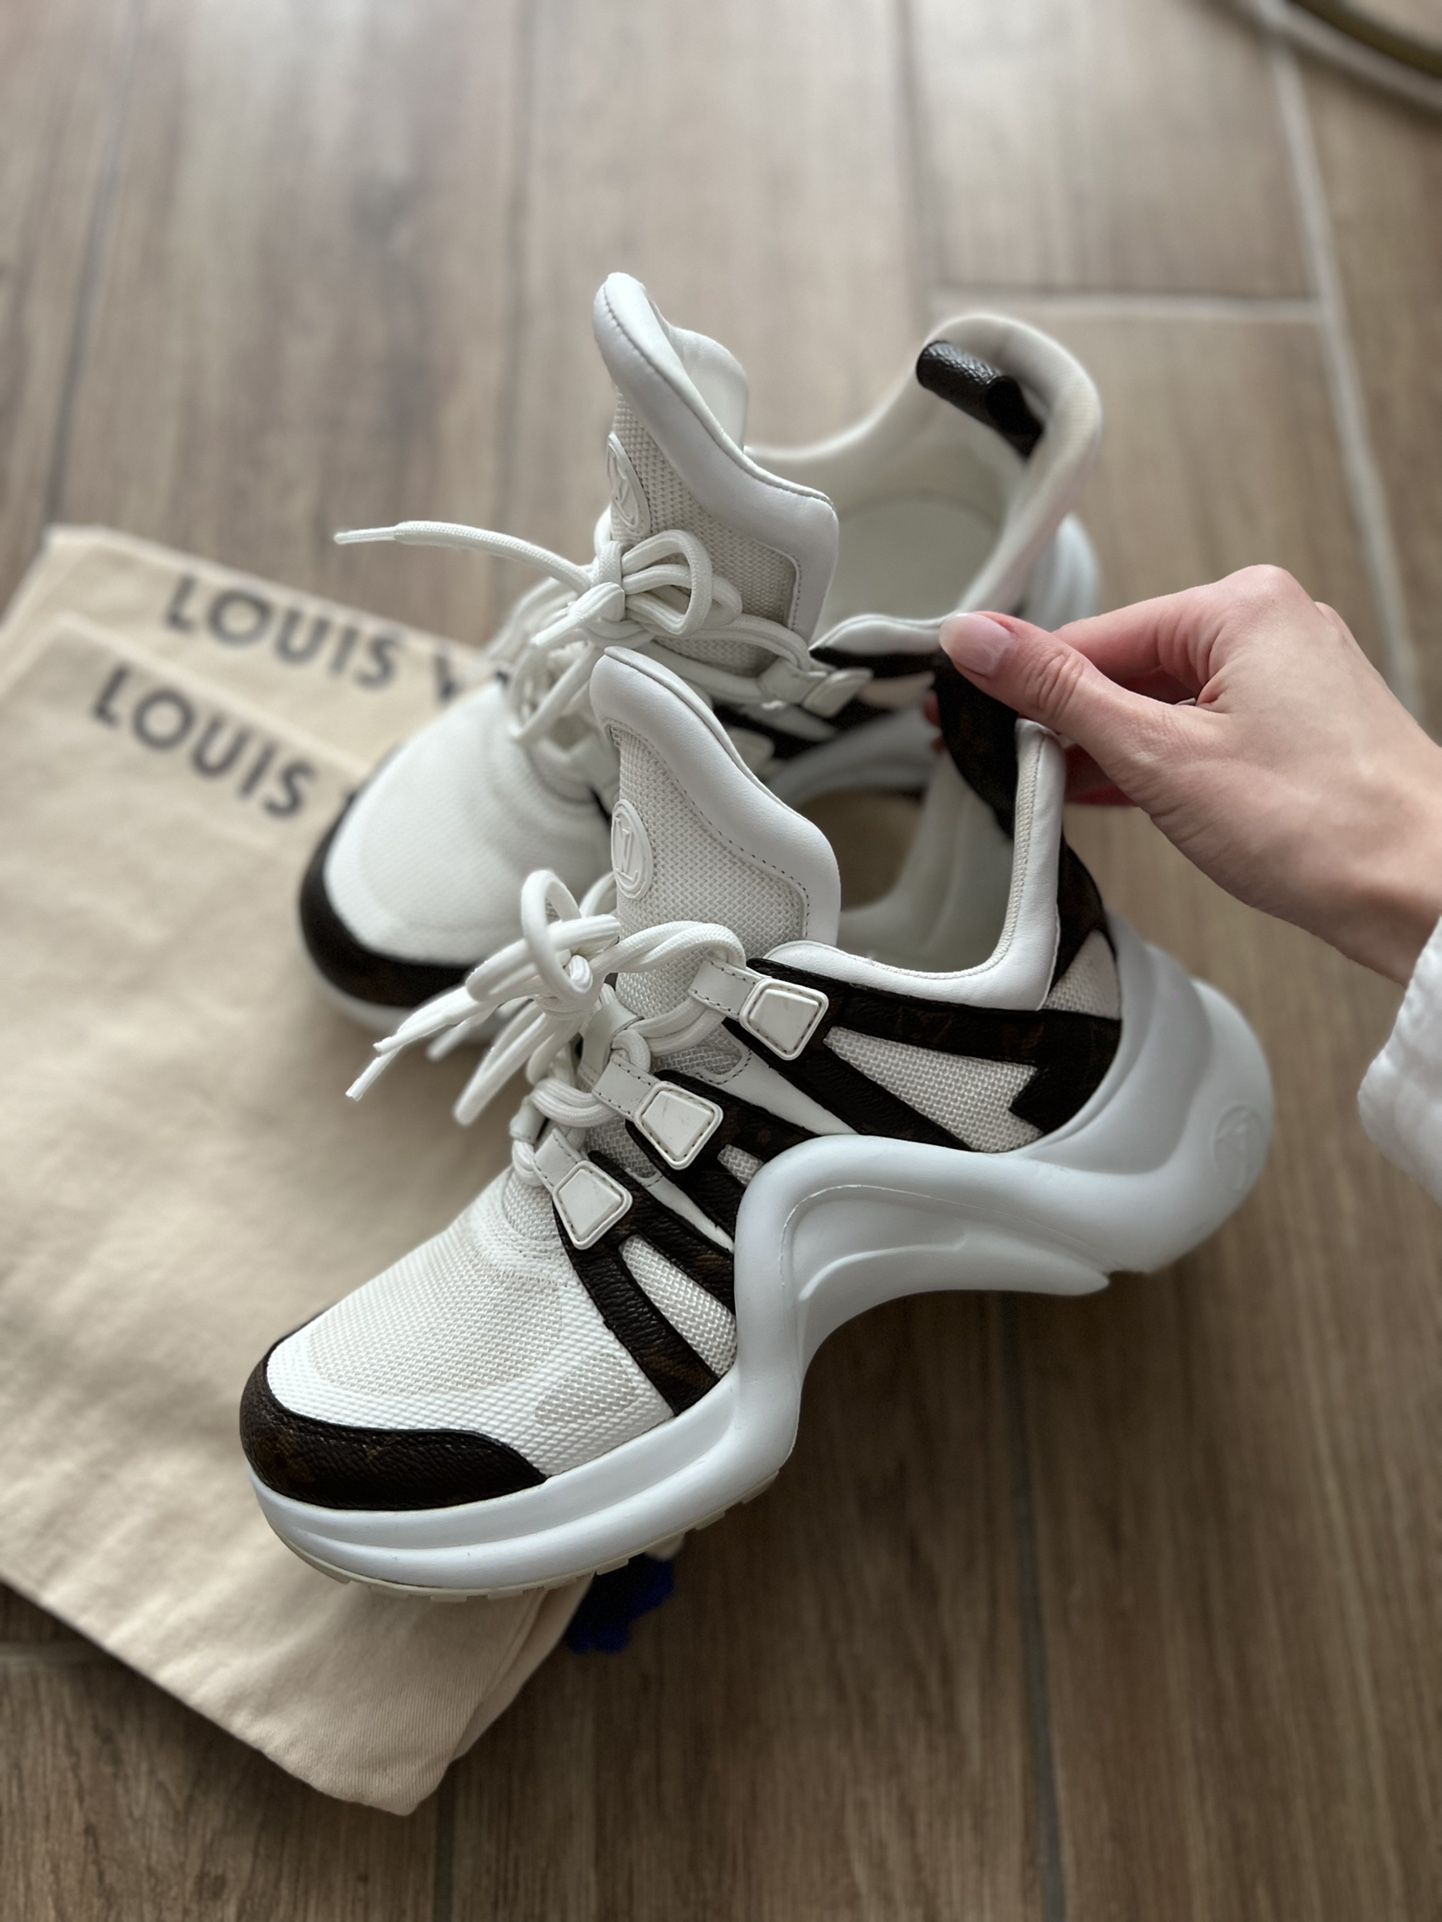 Louis Vuitton Archlight Sneakers Size 36 (6) for Sale in North Miami Beach,  FL - OfferUp